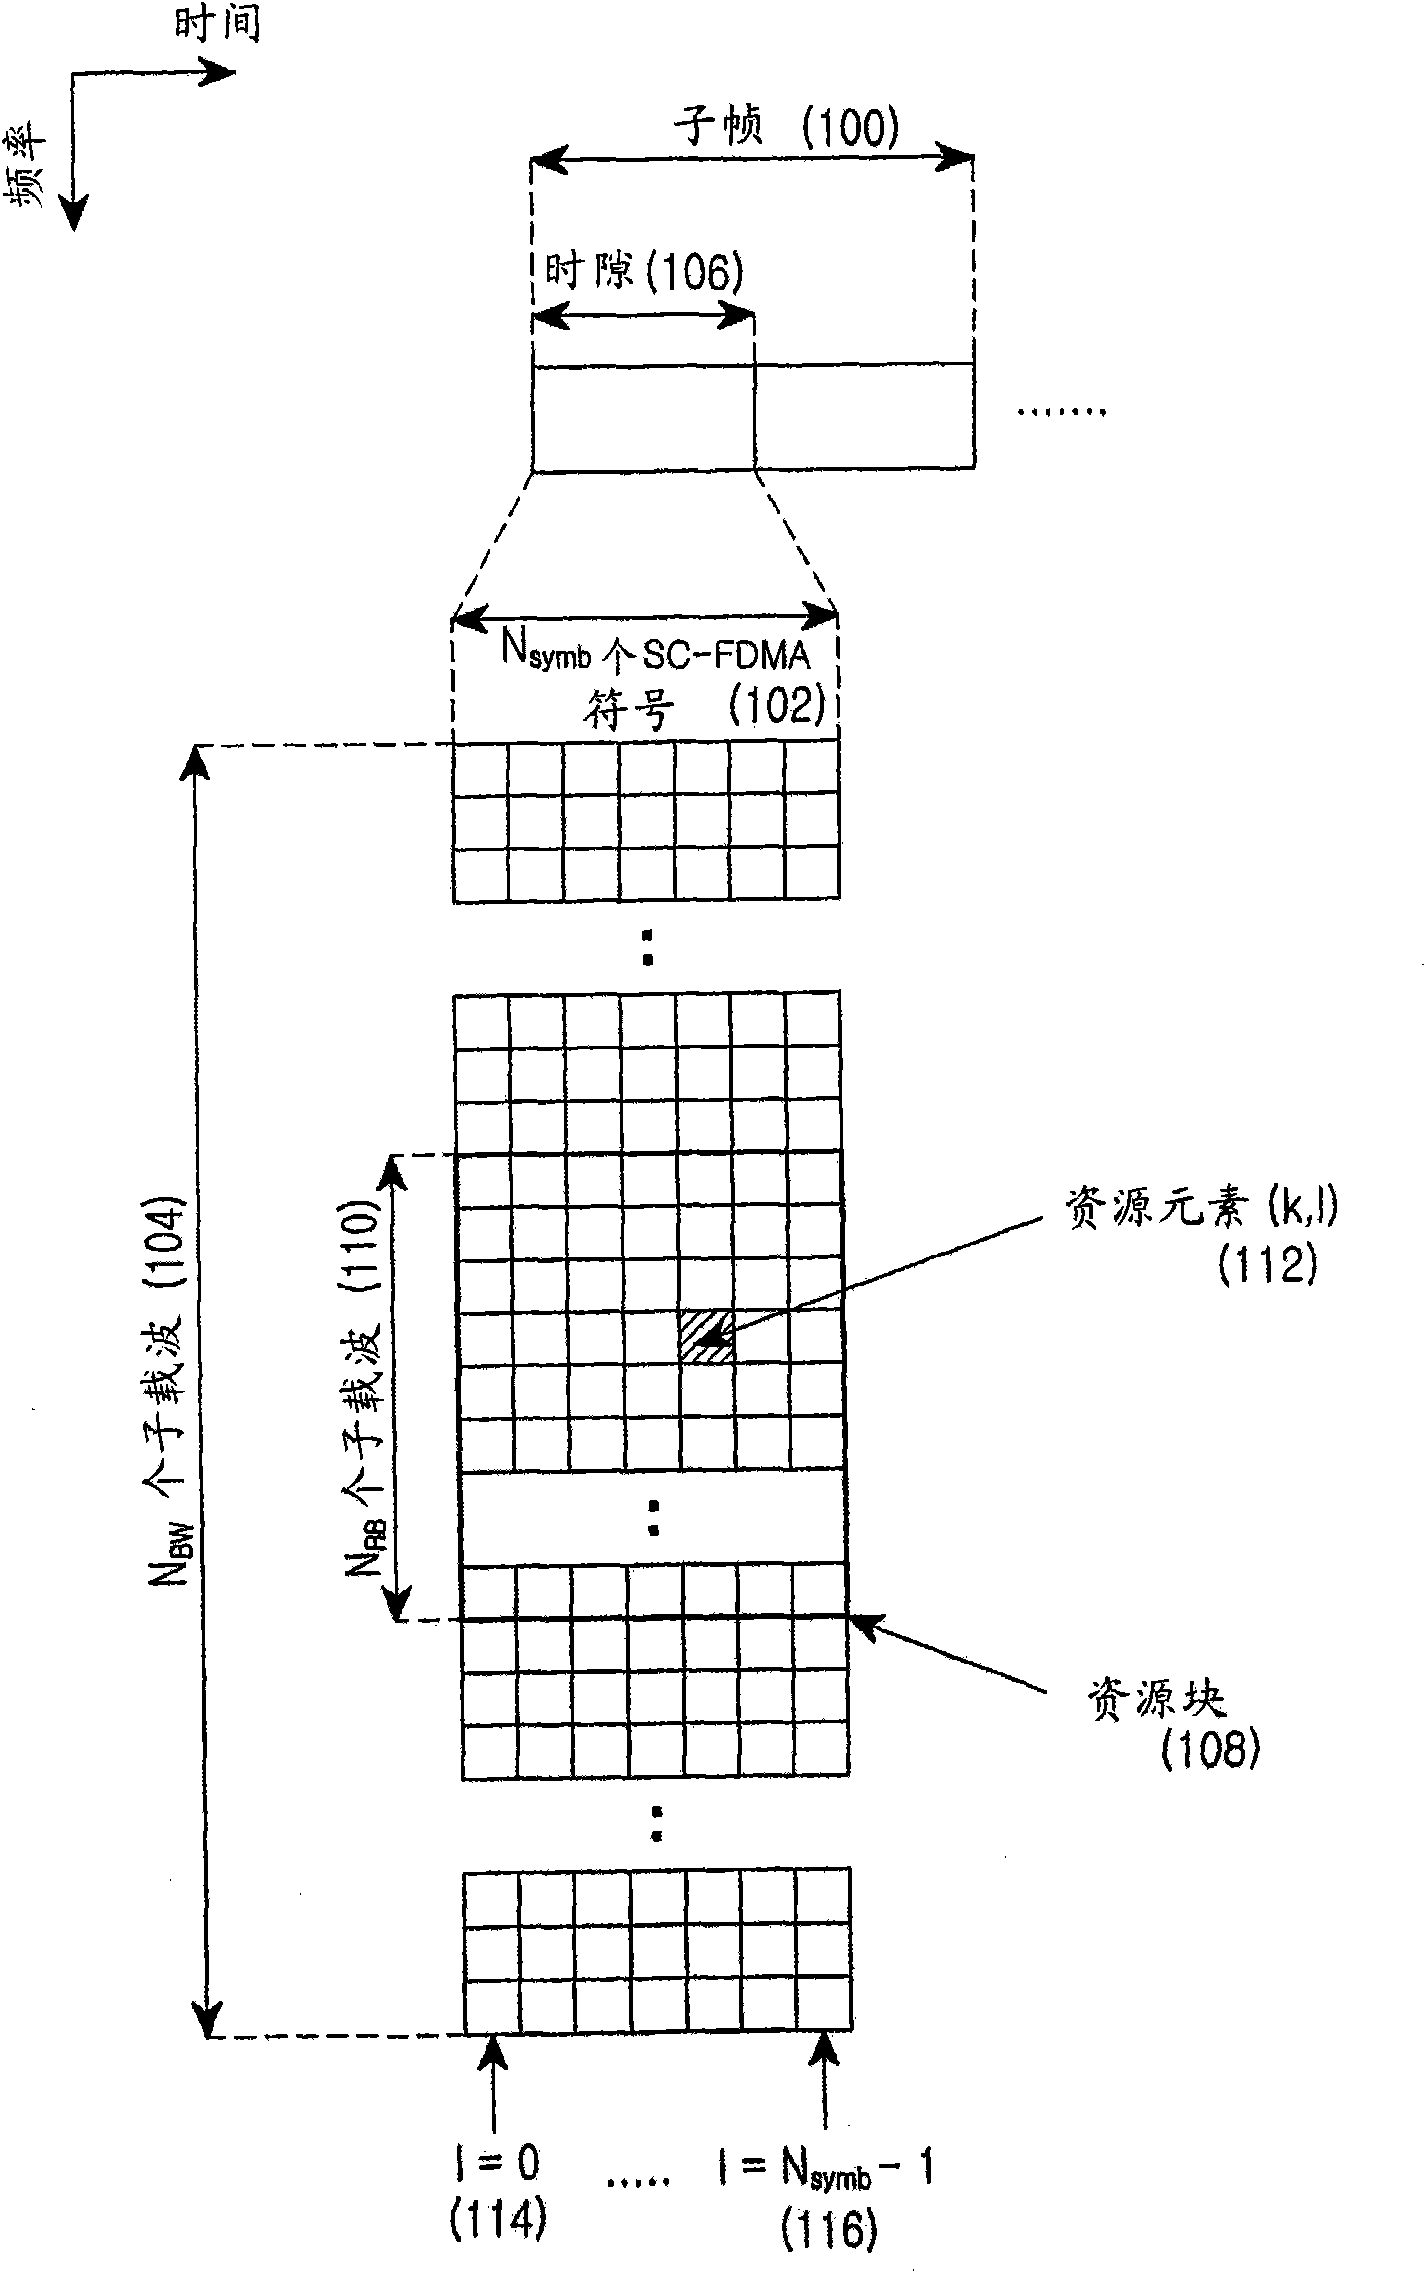 Method and apparatus for interleaving data in a mobile communication system